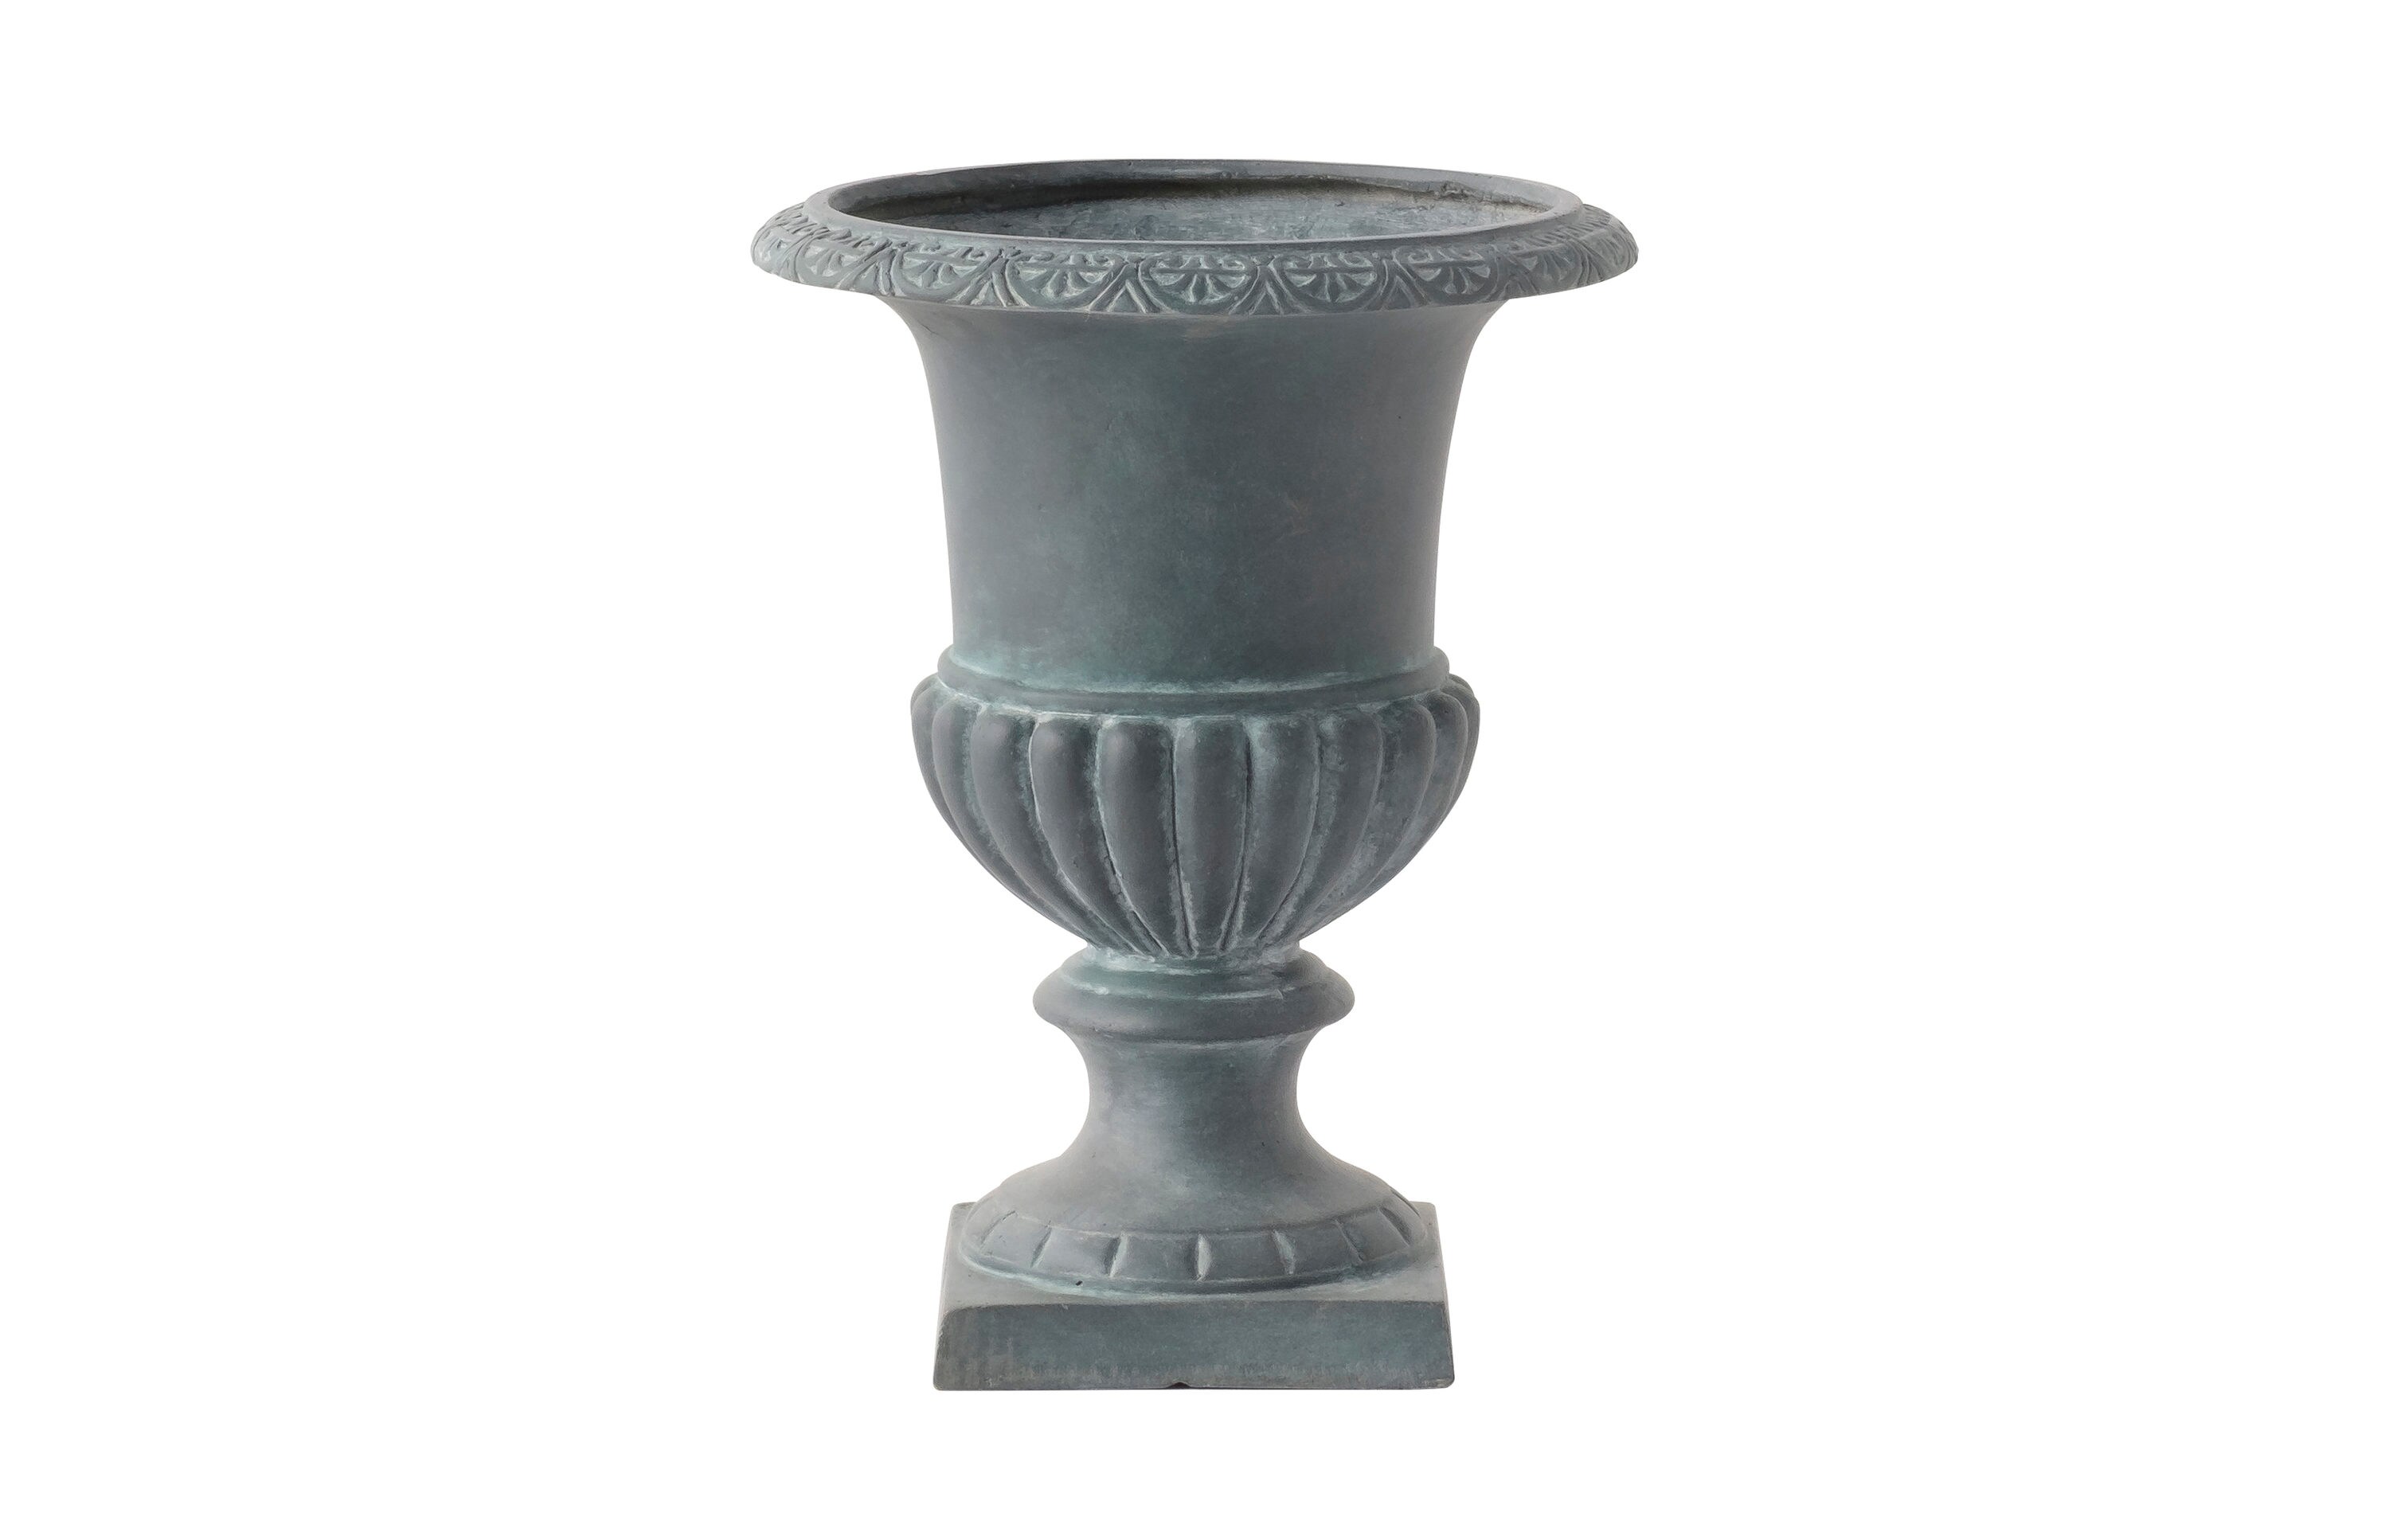 Alfresco Home 13.5-in W x 17.25-in H Gray Stone Contemporary/Modern  Indoor/Outdoor Planter